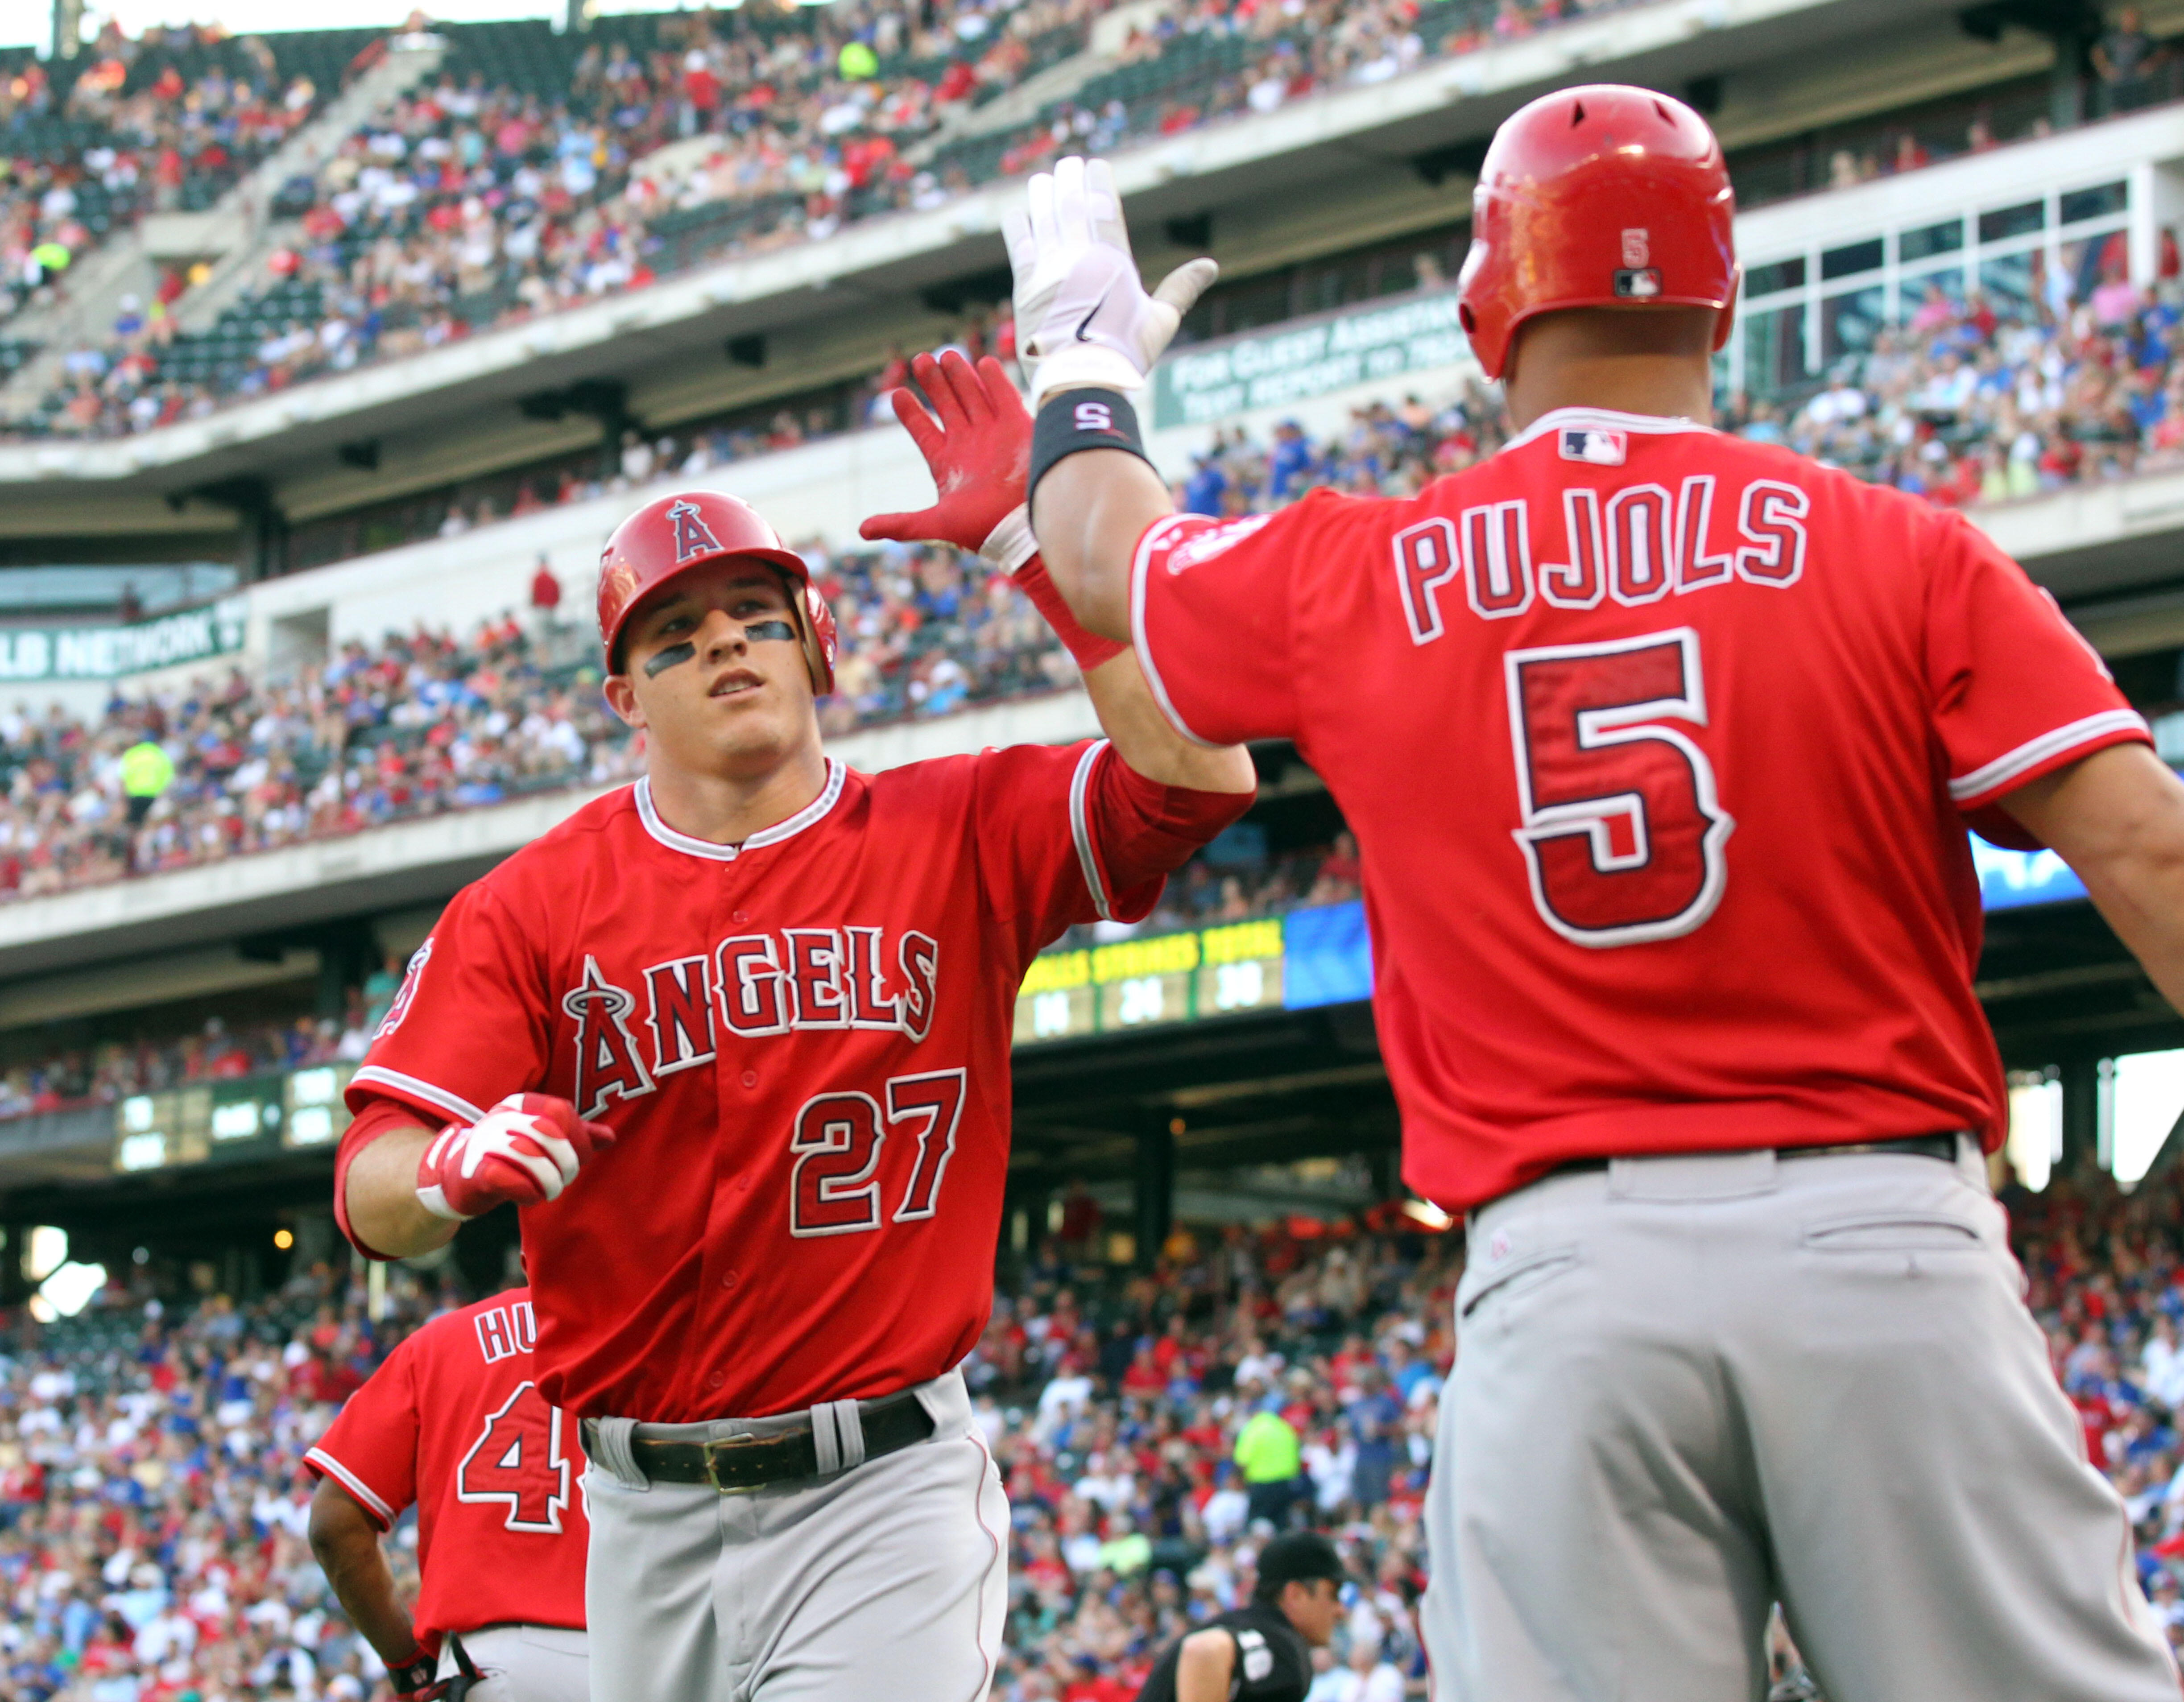 ARLINGTON, TX - JULY 30: Mike Trout #27 of the Los Angeles Angels of Anaheim Texas is congratulated by teammate Albert Pujols #5 at the plate after hitting a 2-run homer in the 3rd inning against the Rangers on July 30, 2012 at the Rangers Ballpark in Arl